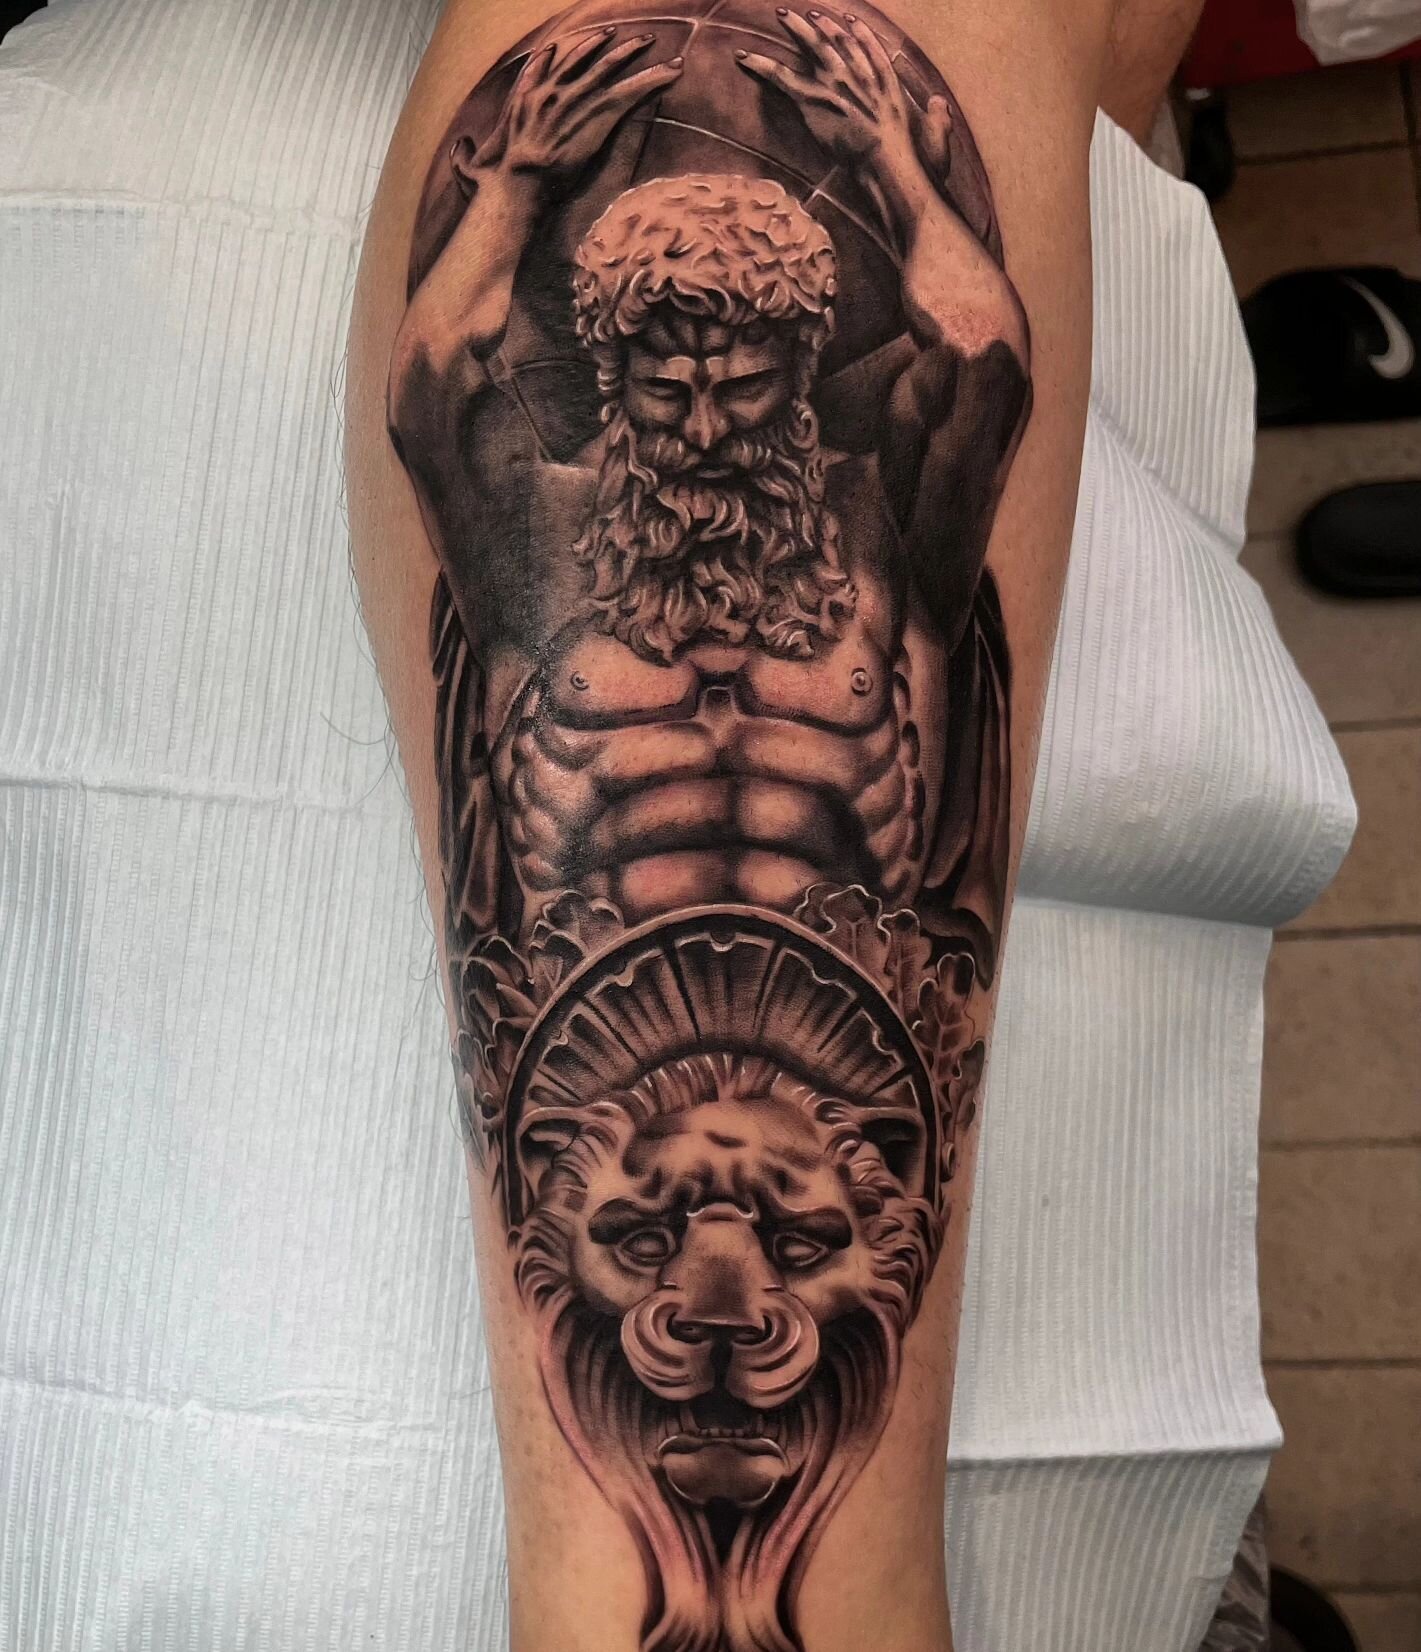 Beautiful black and gray realism Atlas tattoo done by Tadao @tstattoodesign 
If you are interested in his work let us know via our website.
Or you could DM him👉 @tstattoodesign 

#BLACKANDGRAYTATTOOS #atlas #atlastattoo #greekmythology #realismtatto